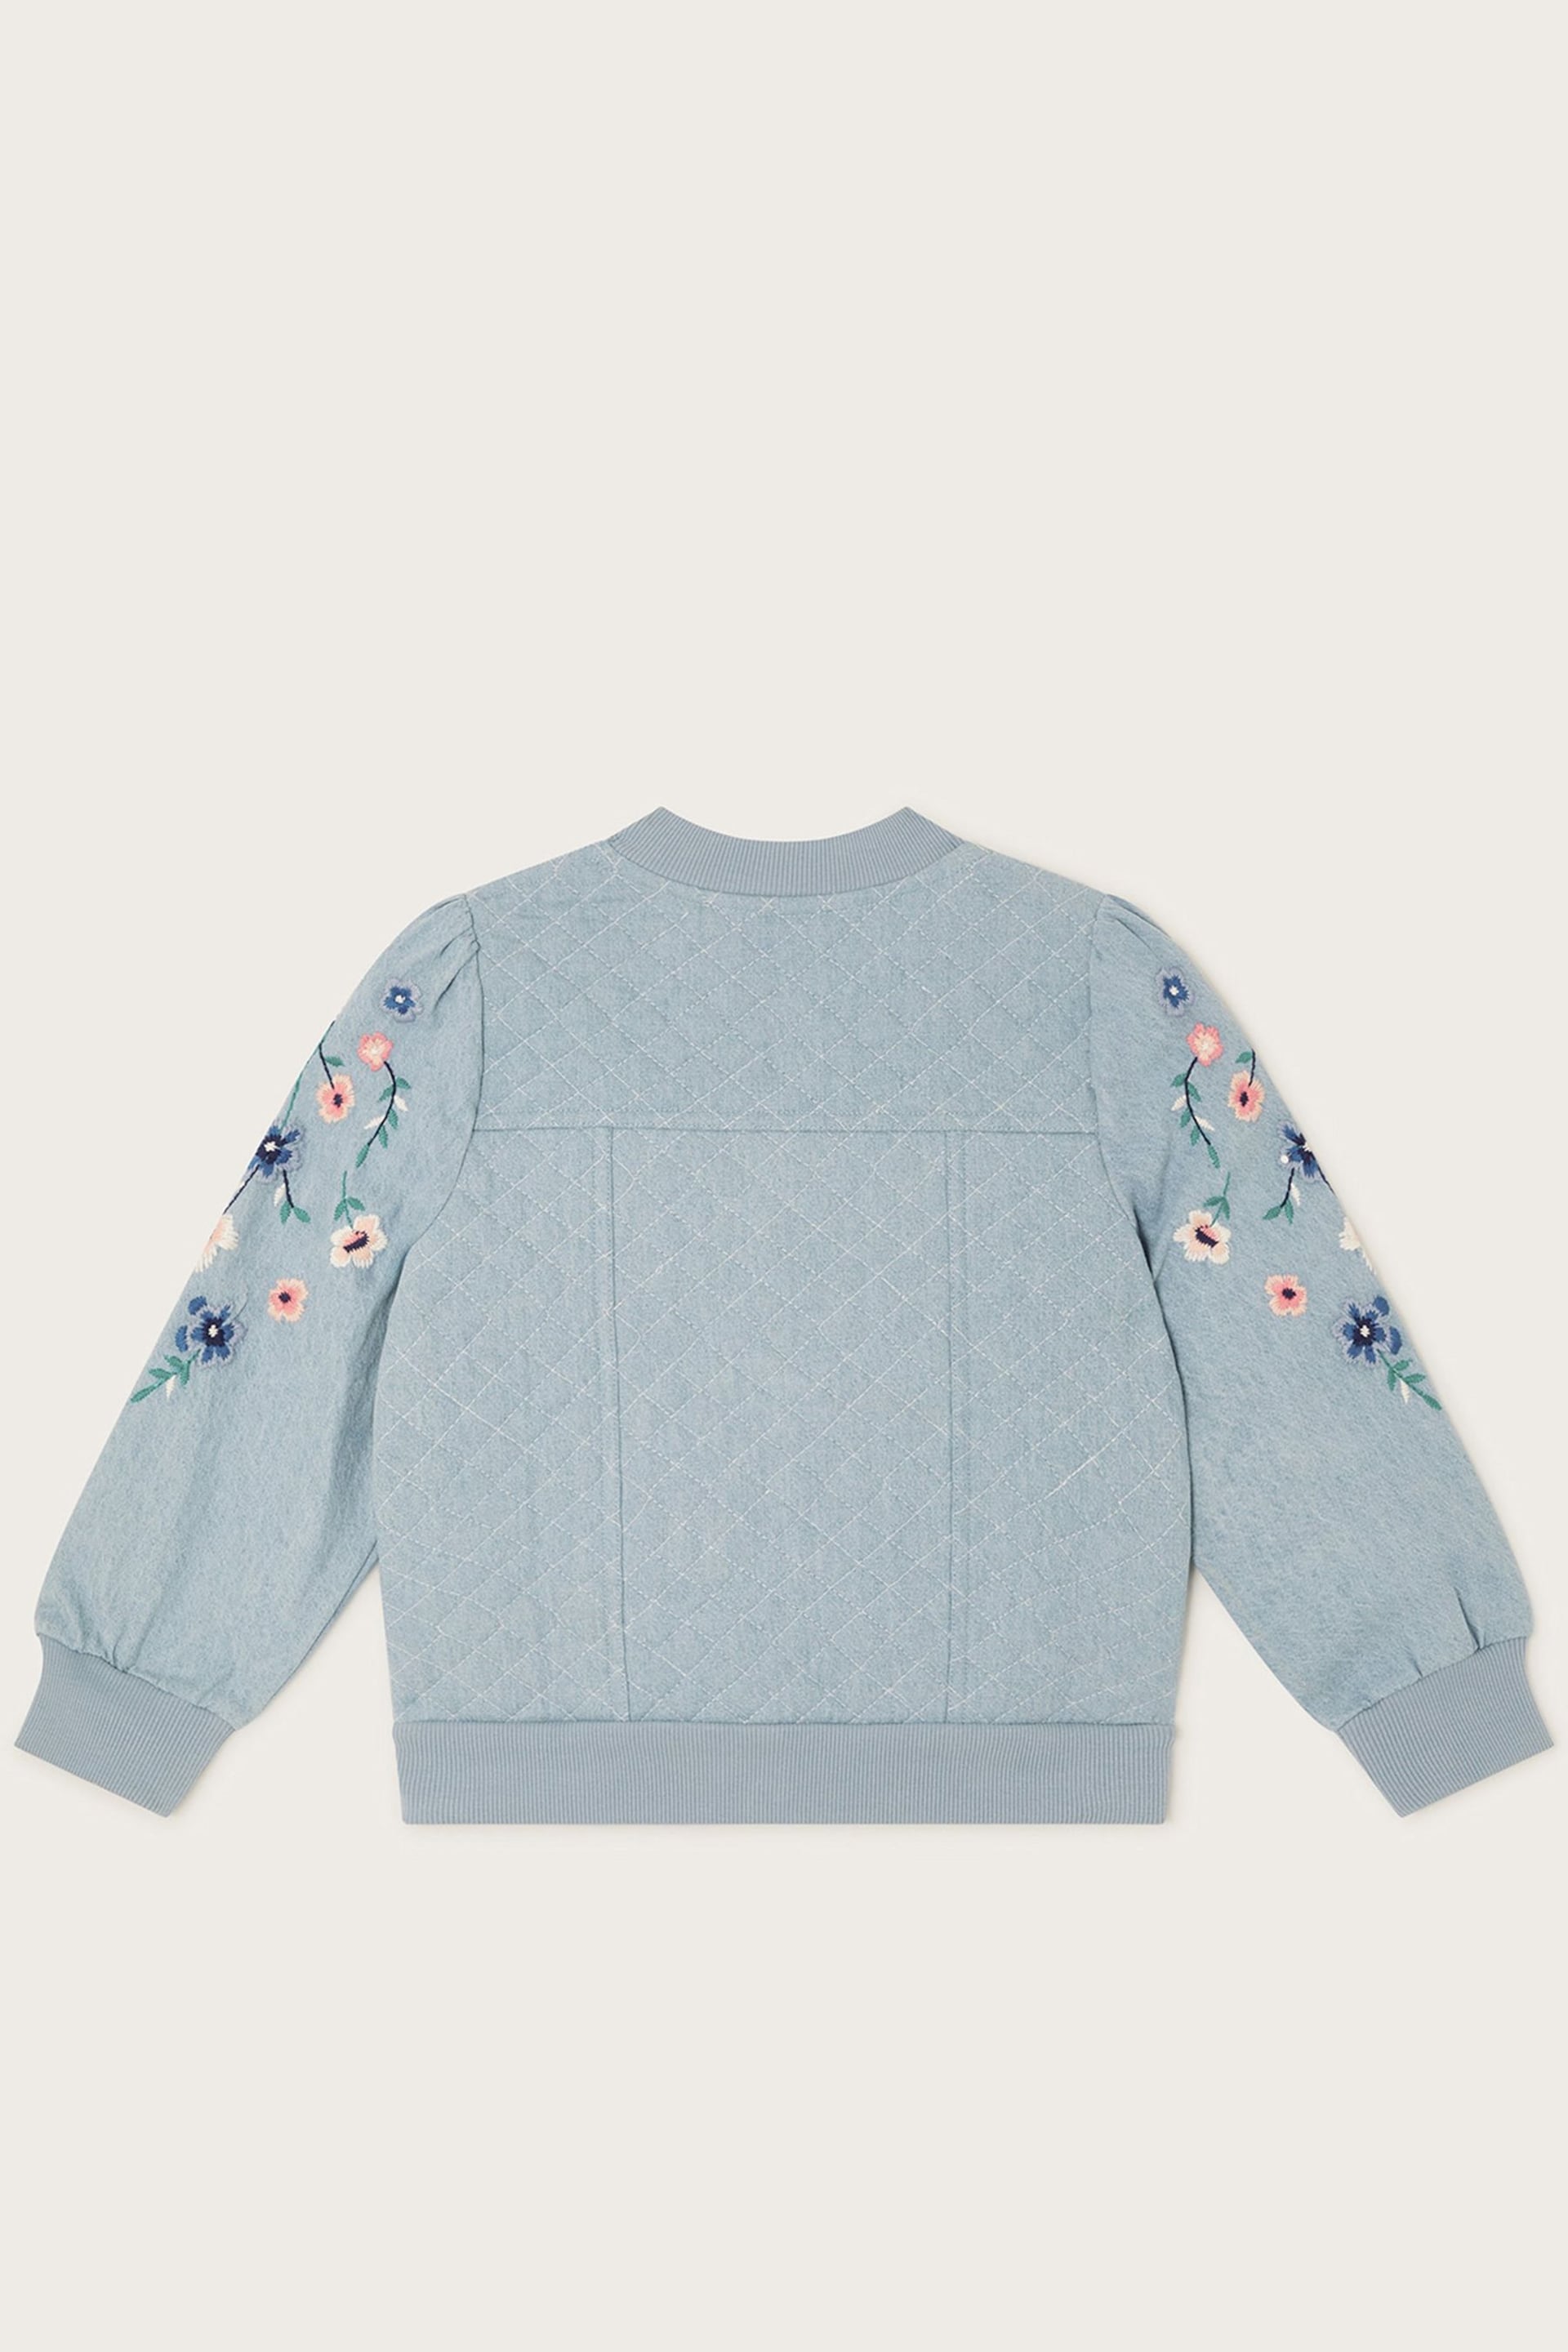 Monsoon Blue Chambray Embroidered Bomber Jacket - Image 2 of 3